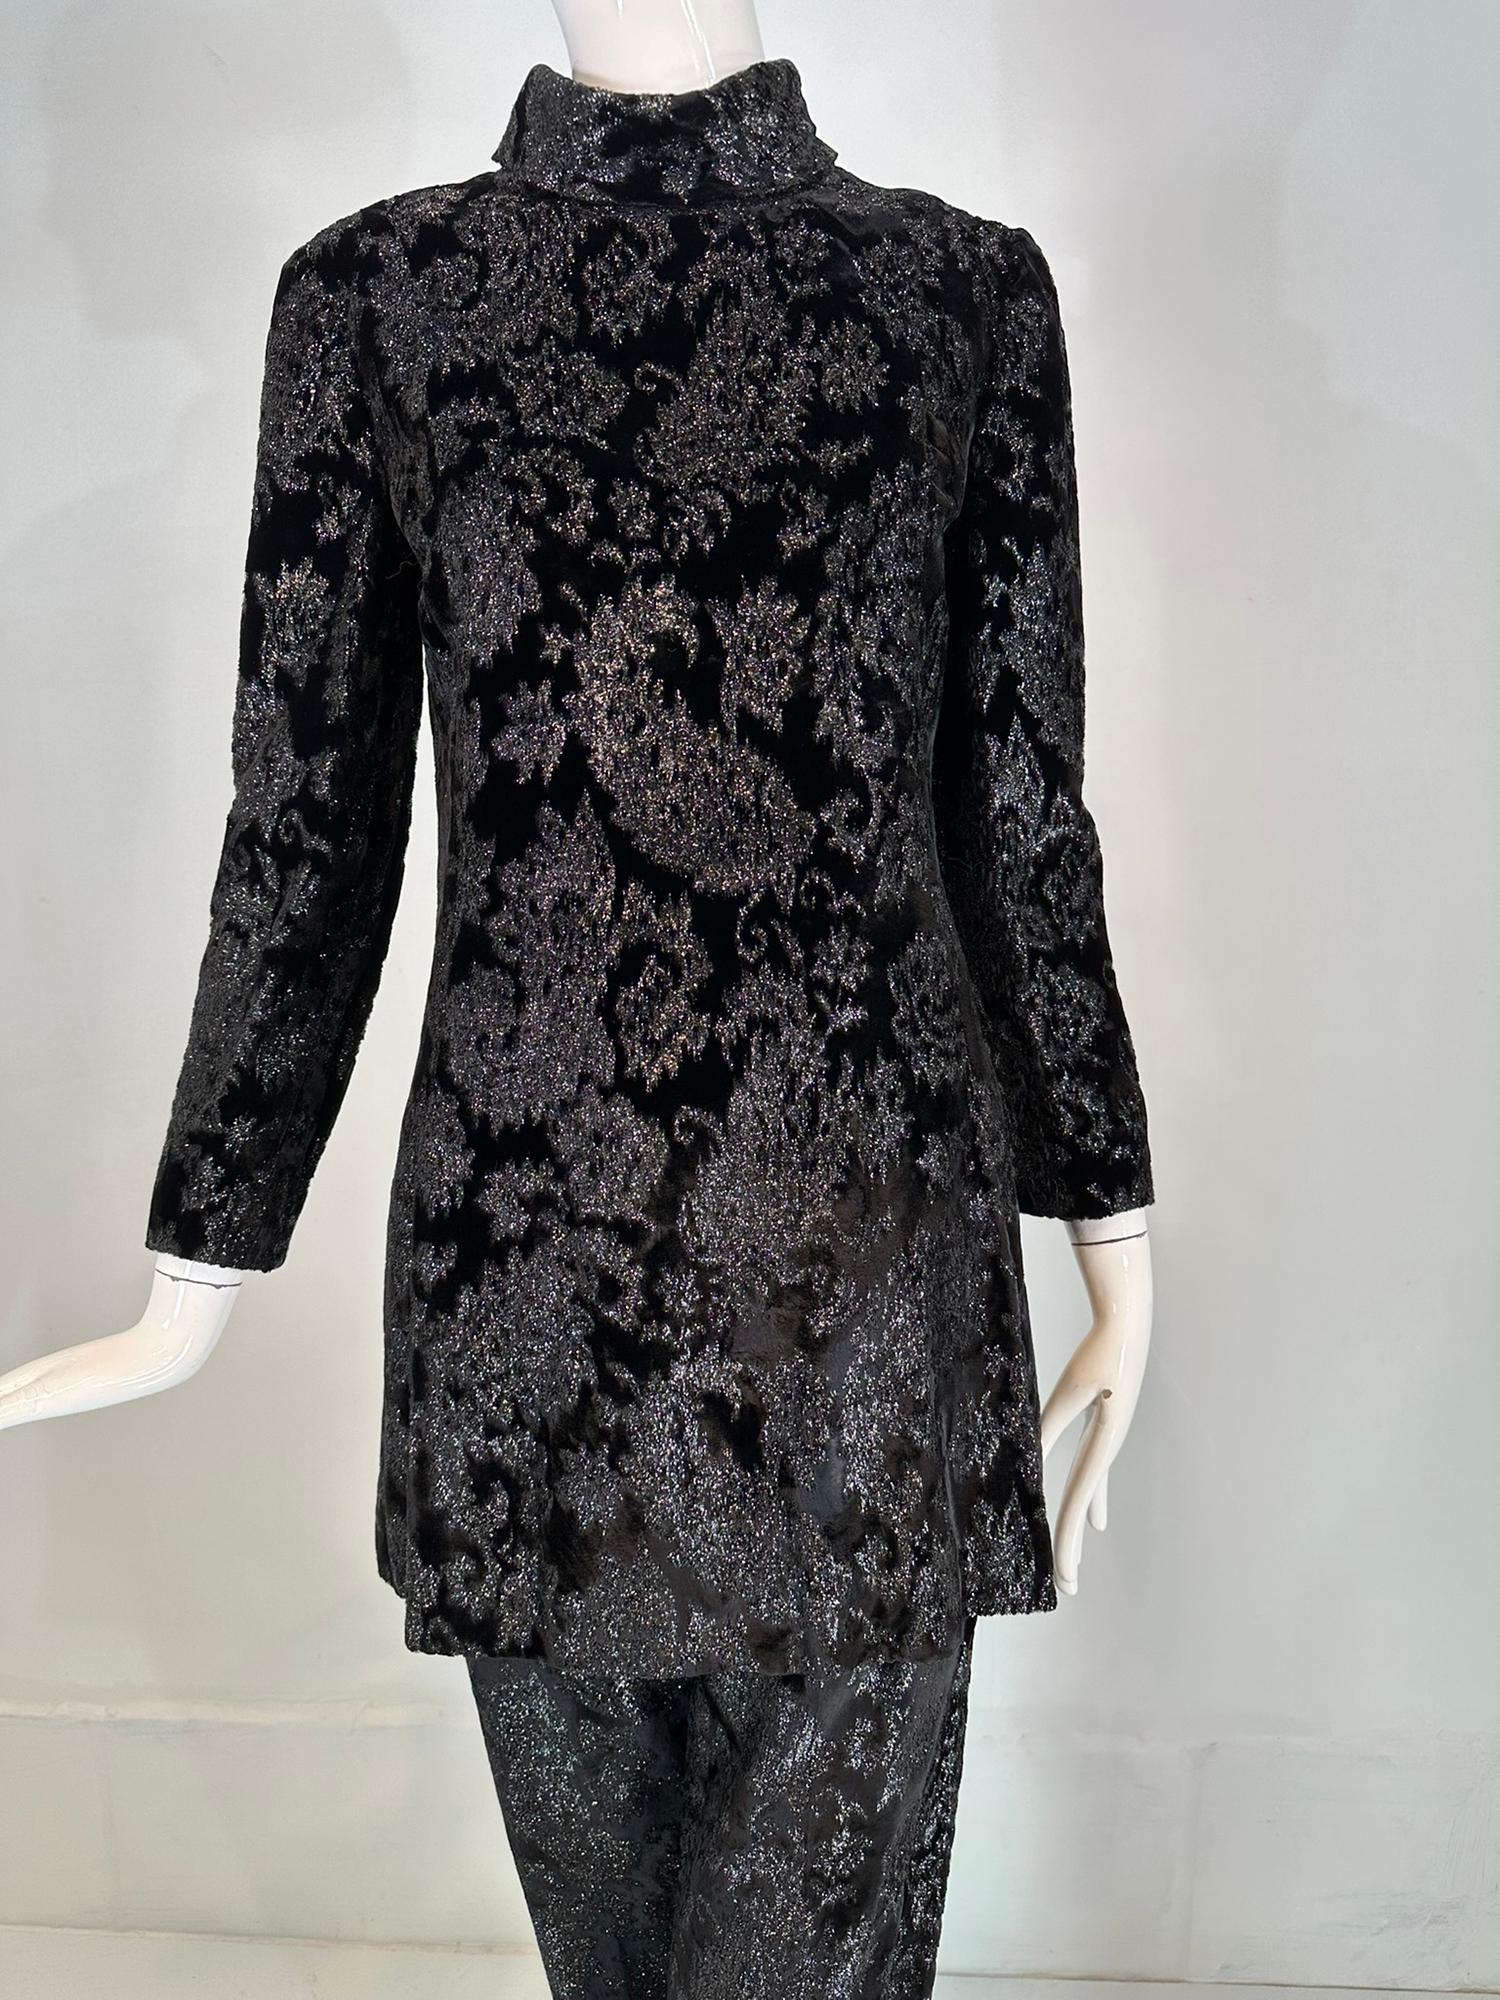 Givenchy black princess seam glittery paisley velvet tunic & pant set from the 1970s. Glittery black velvet set features a princess seam, A line shape tunic with a turtle neck, long sleeves. There are side front hem vents, the top is fully lined and